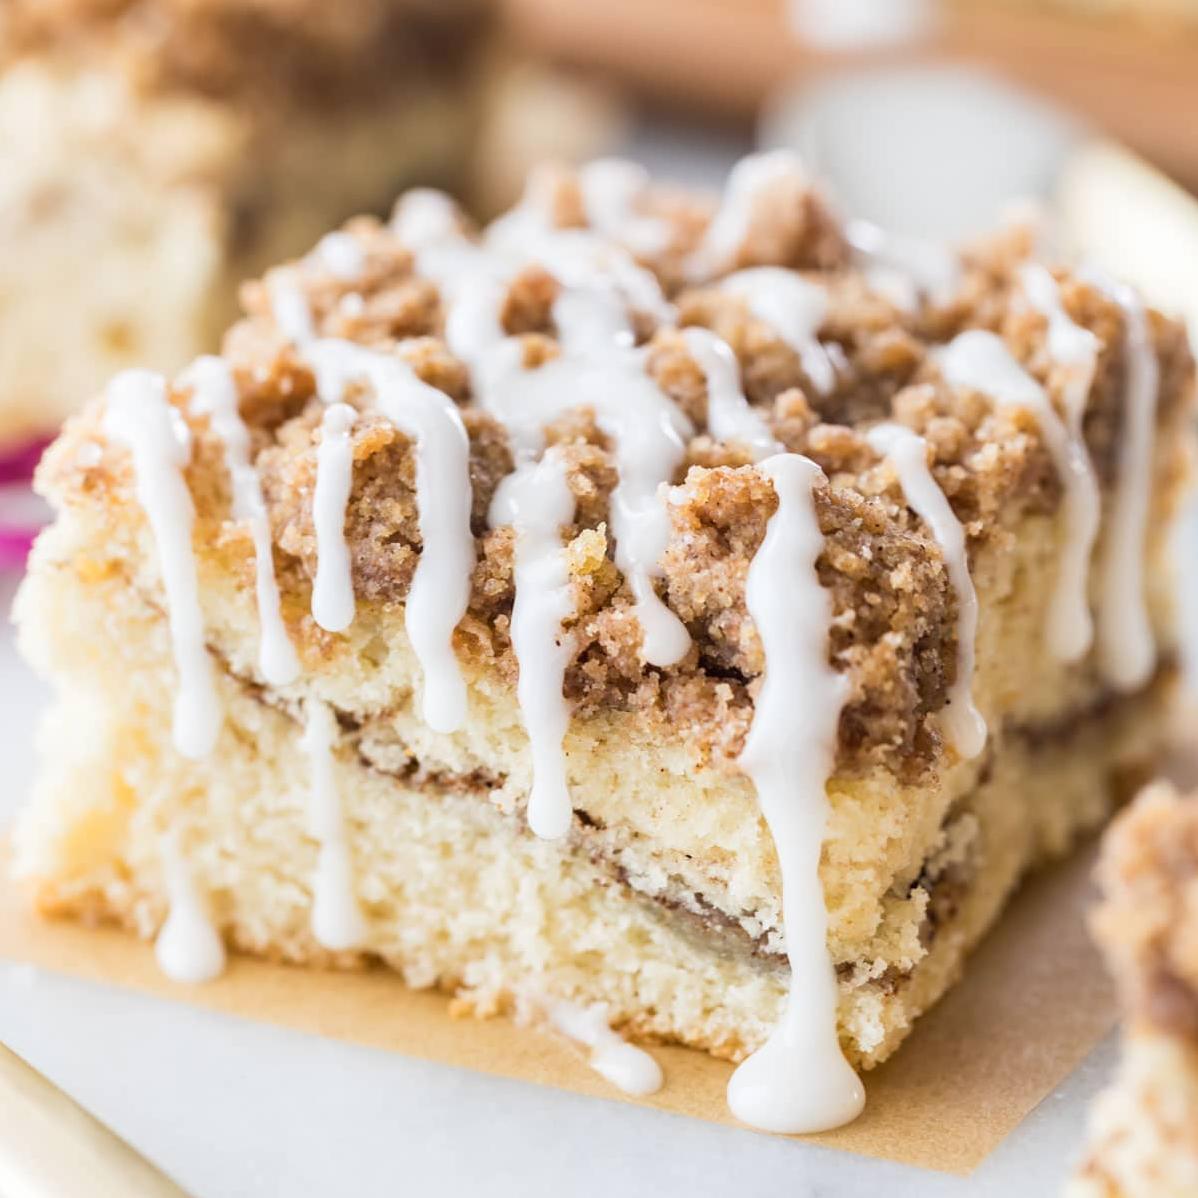  Perfect for a cosy Sunday morning, the cinnamon coffee cake is a treat for the senses!